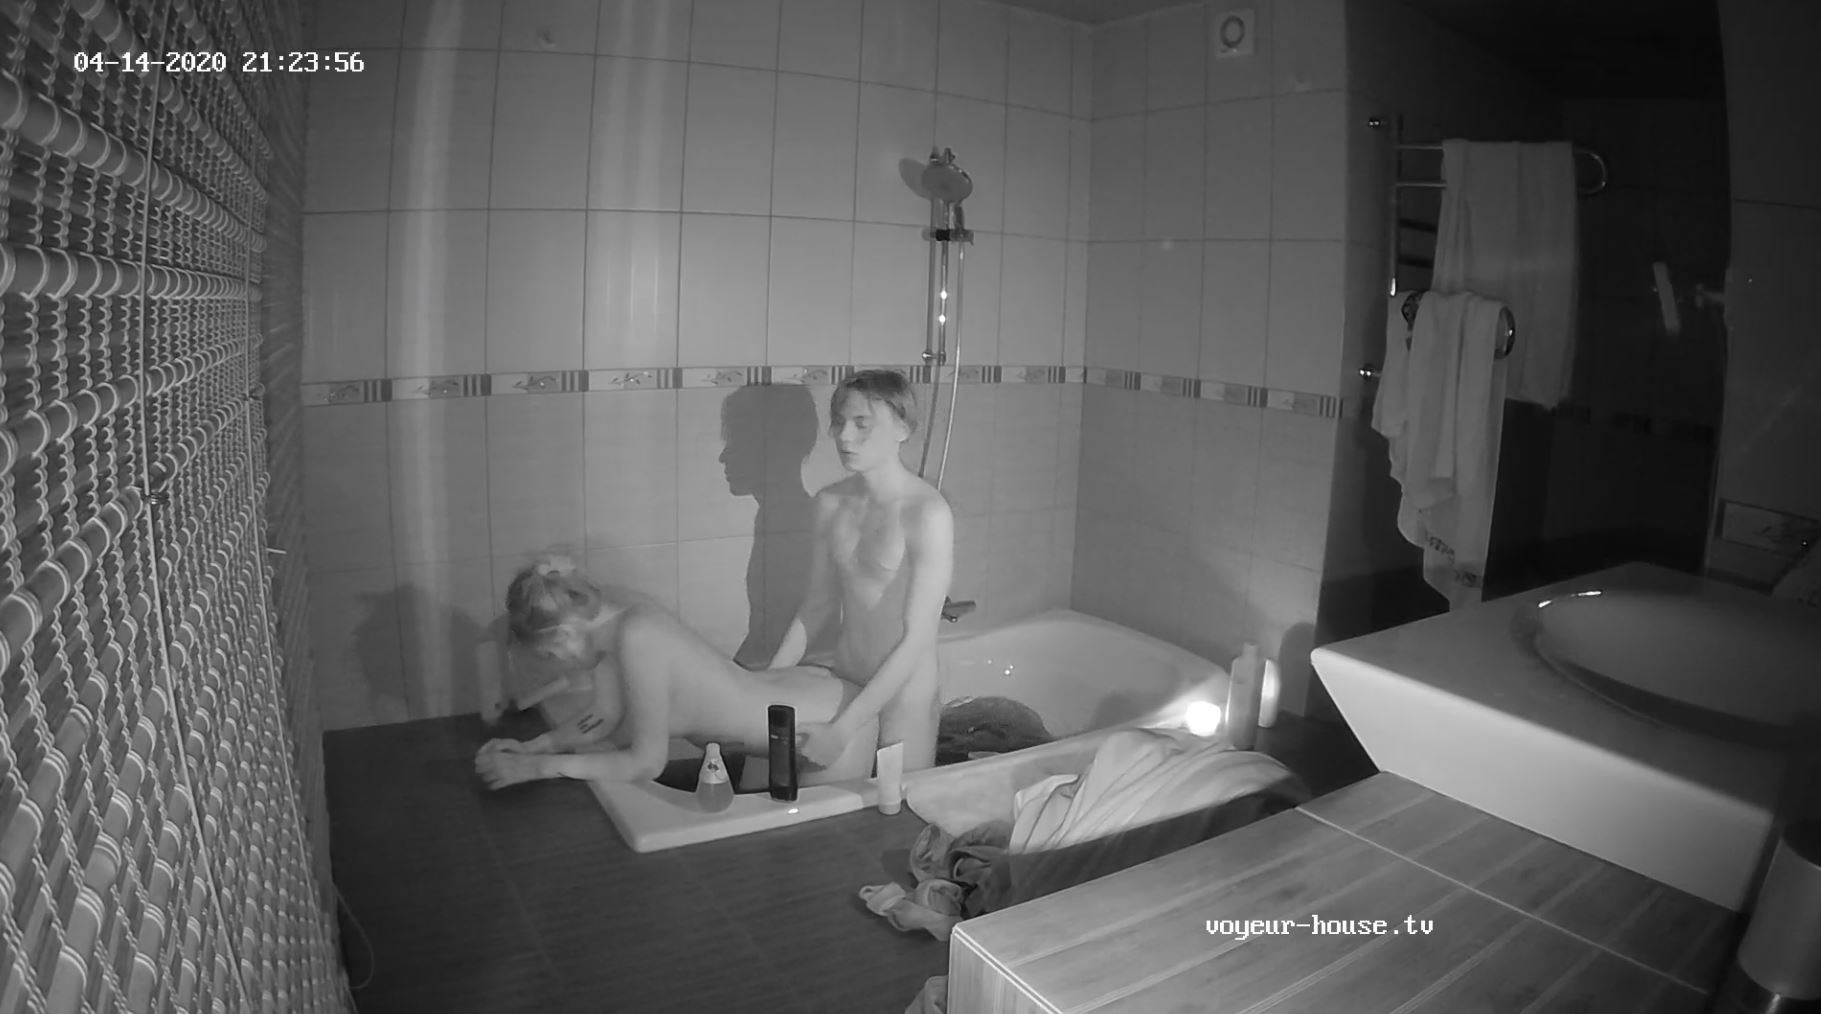 Watch Shower girl Guest couple bath and sex in the dark, Apr14/20 Naked people with Ian and Deborah in Bathroom The biggest Voyeur Videos gallery Porn Pic Hd